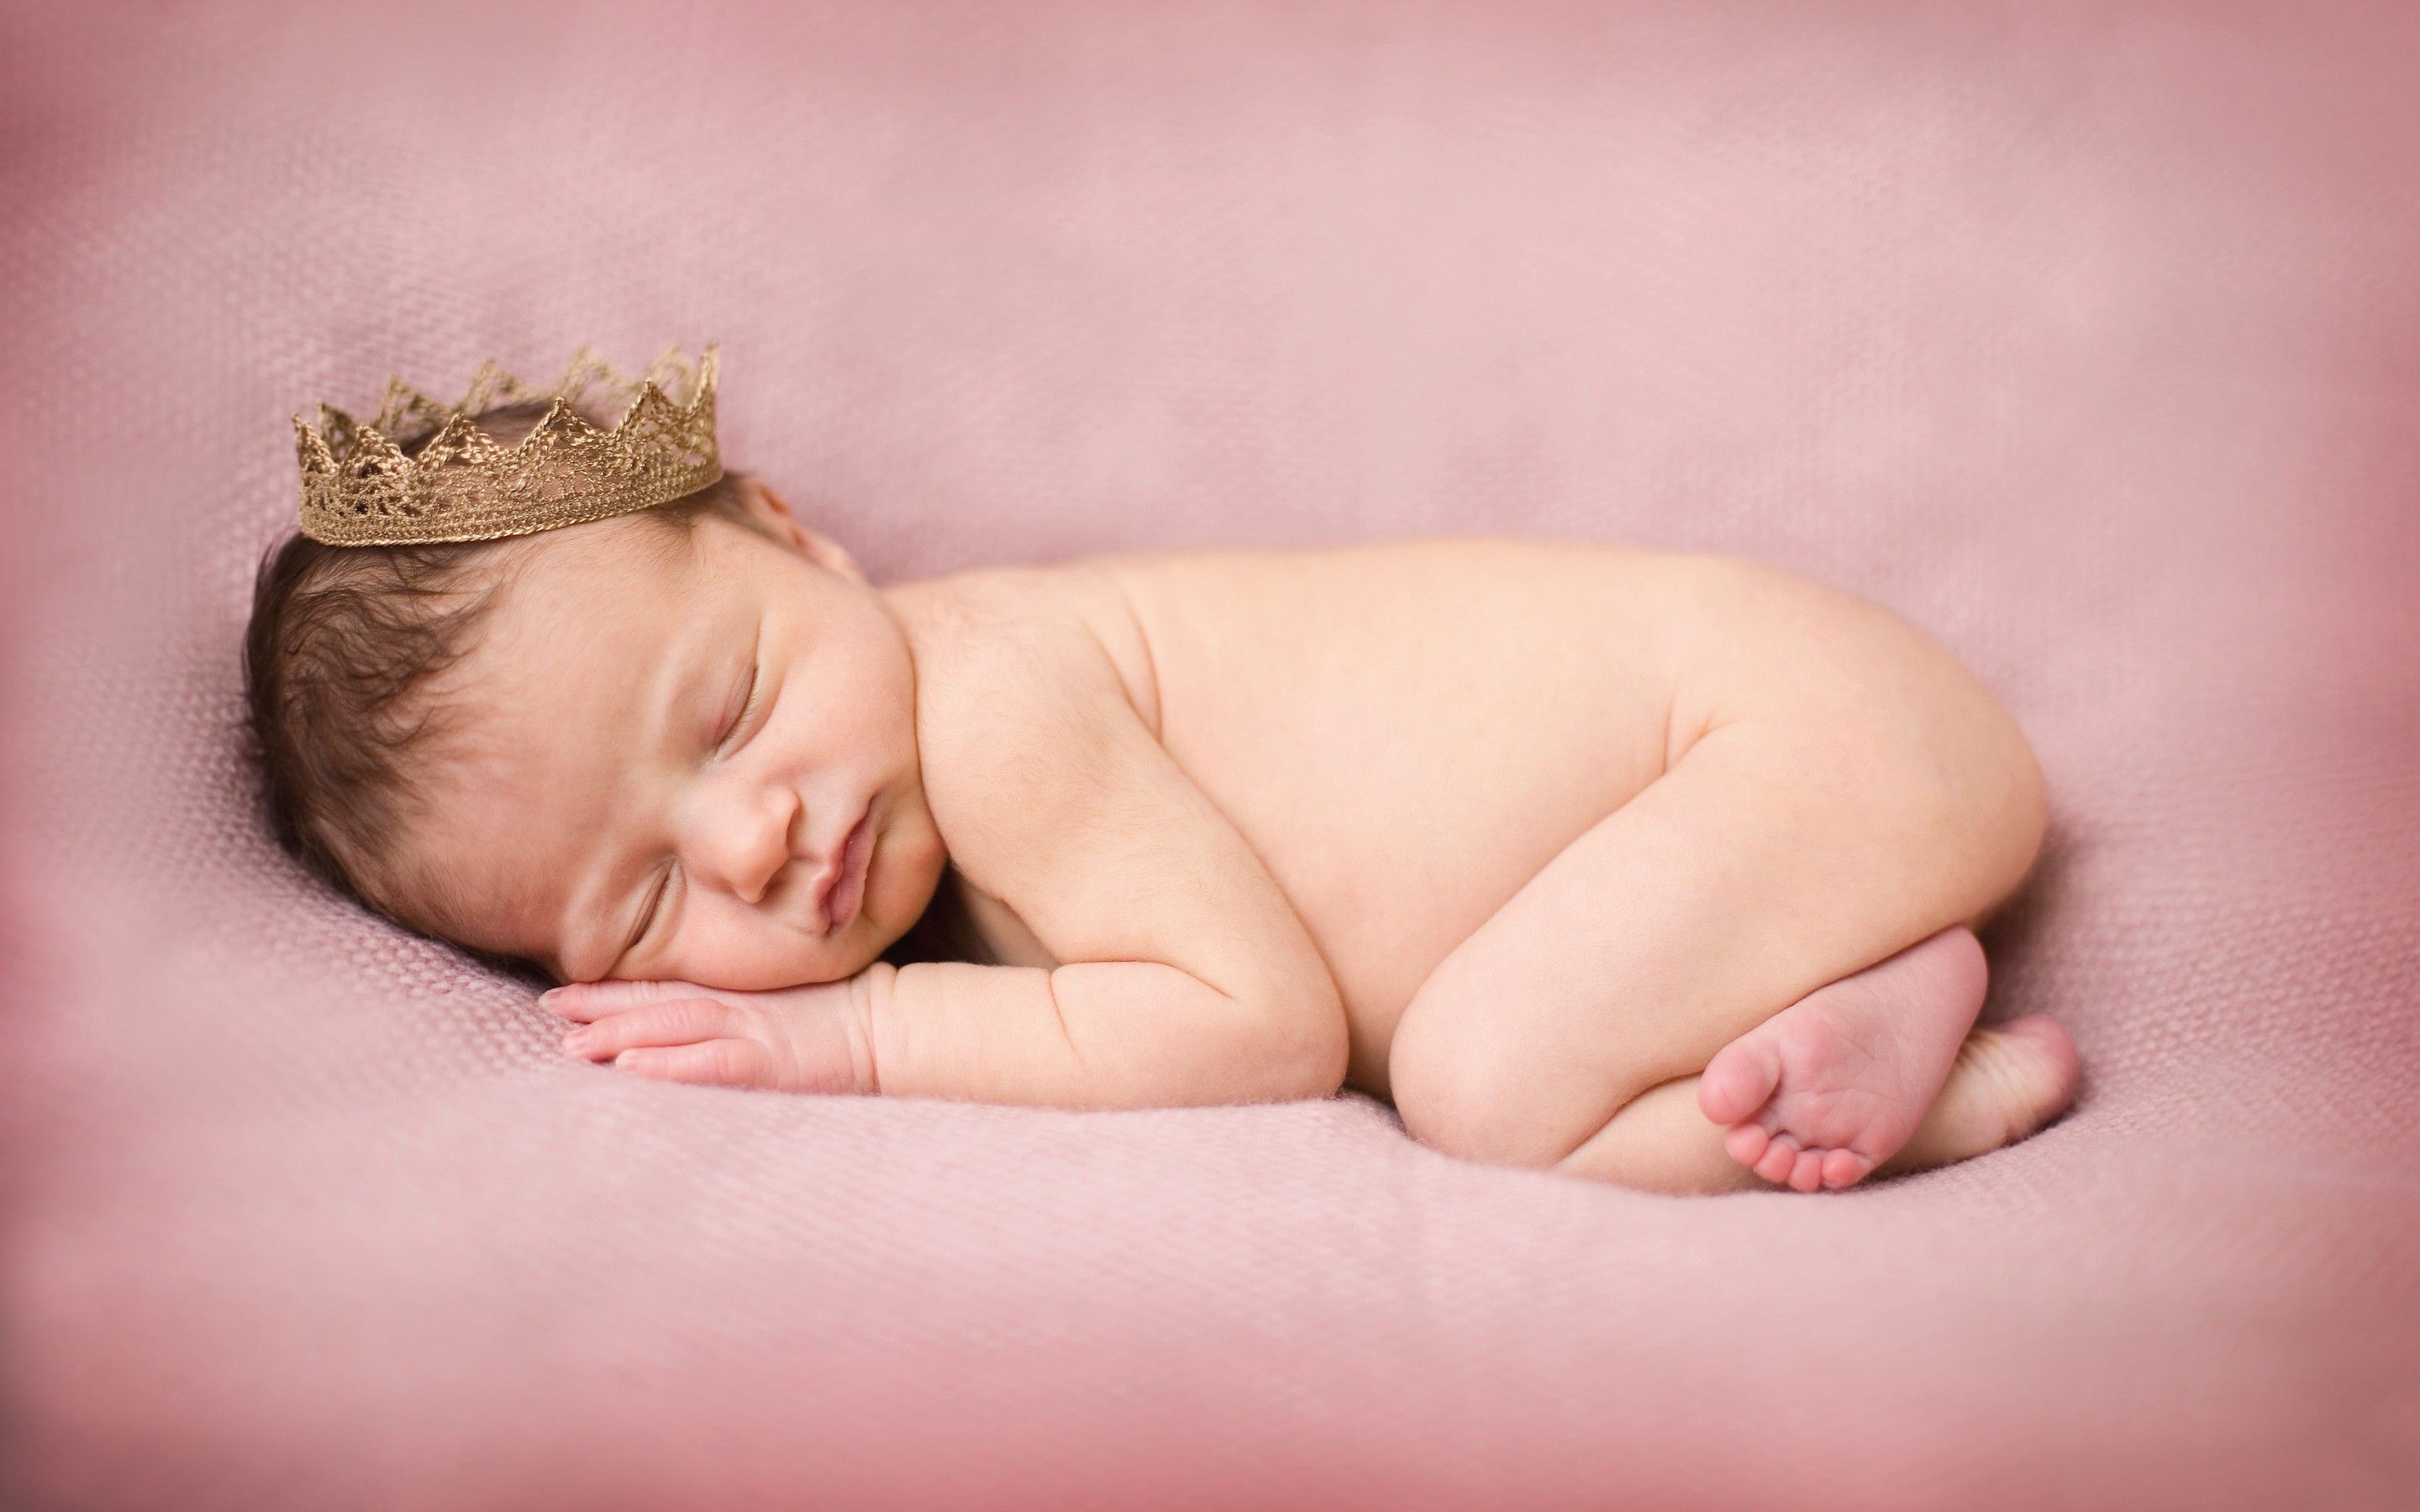 New Born Baby, HD Cute, 4k Wallpaper, Image, Background, Photo